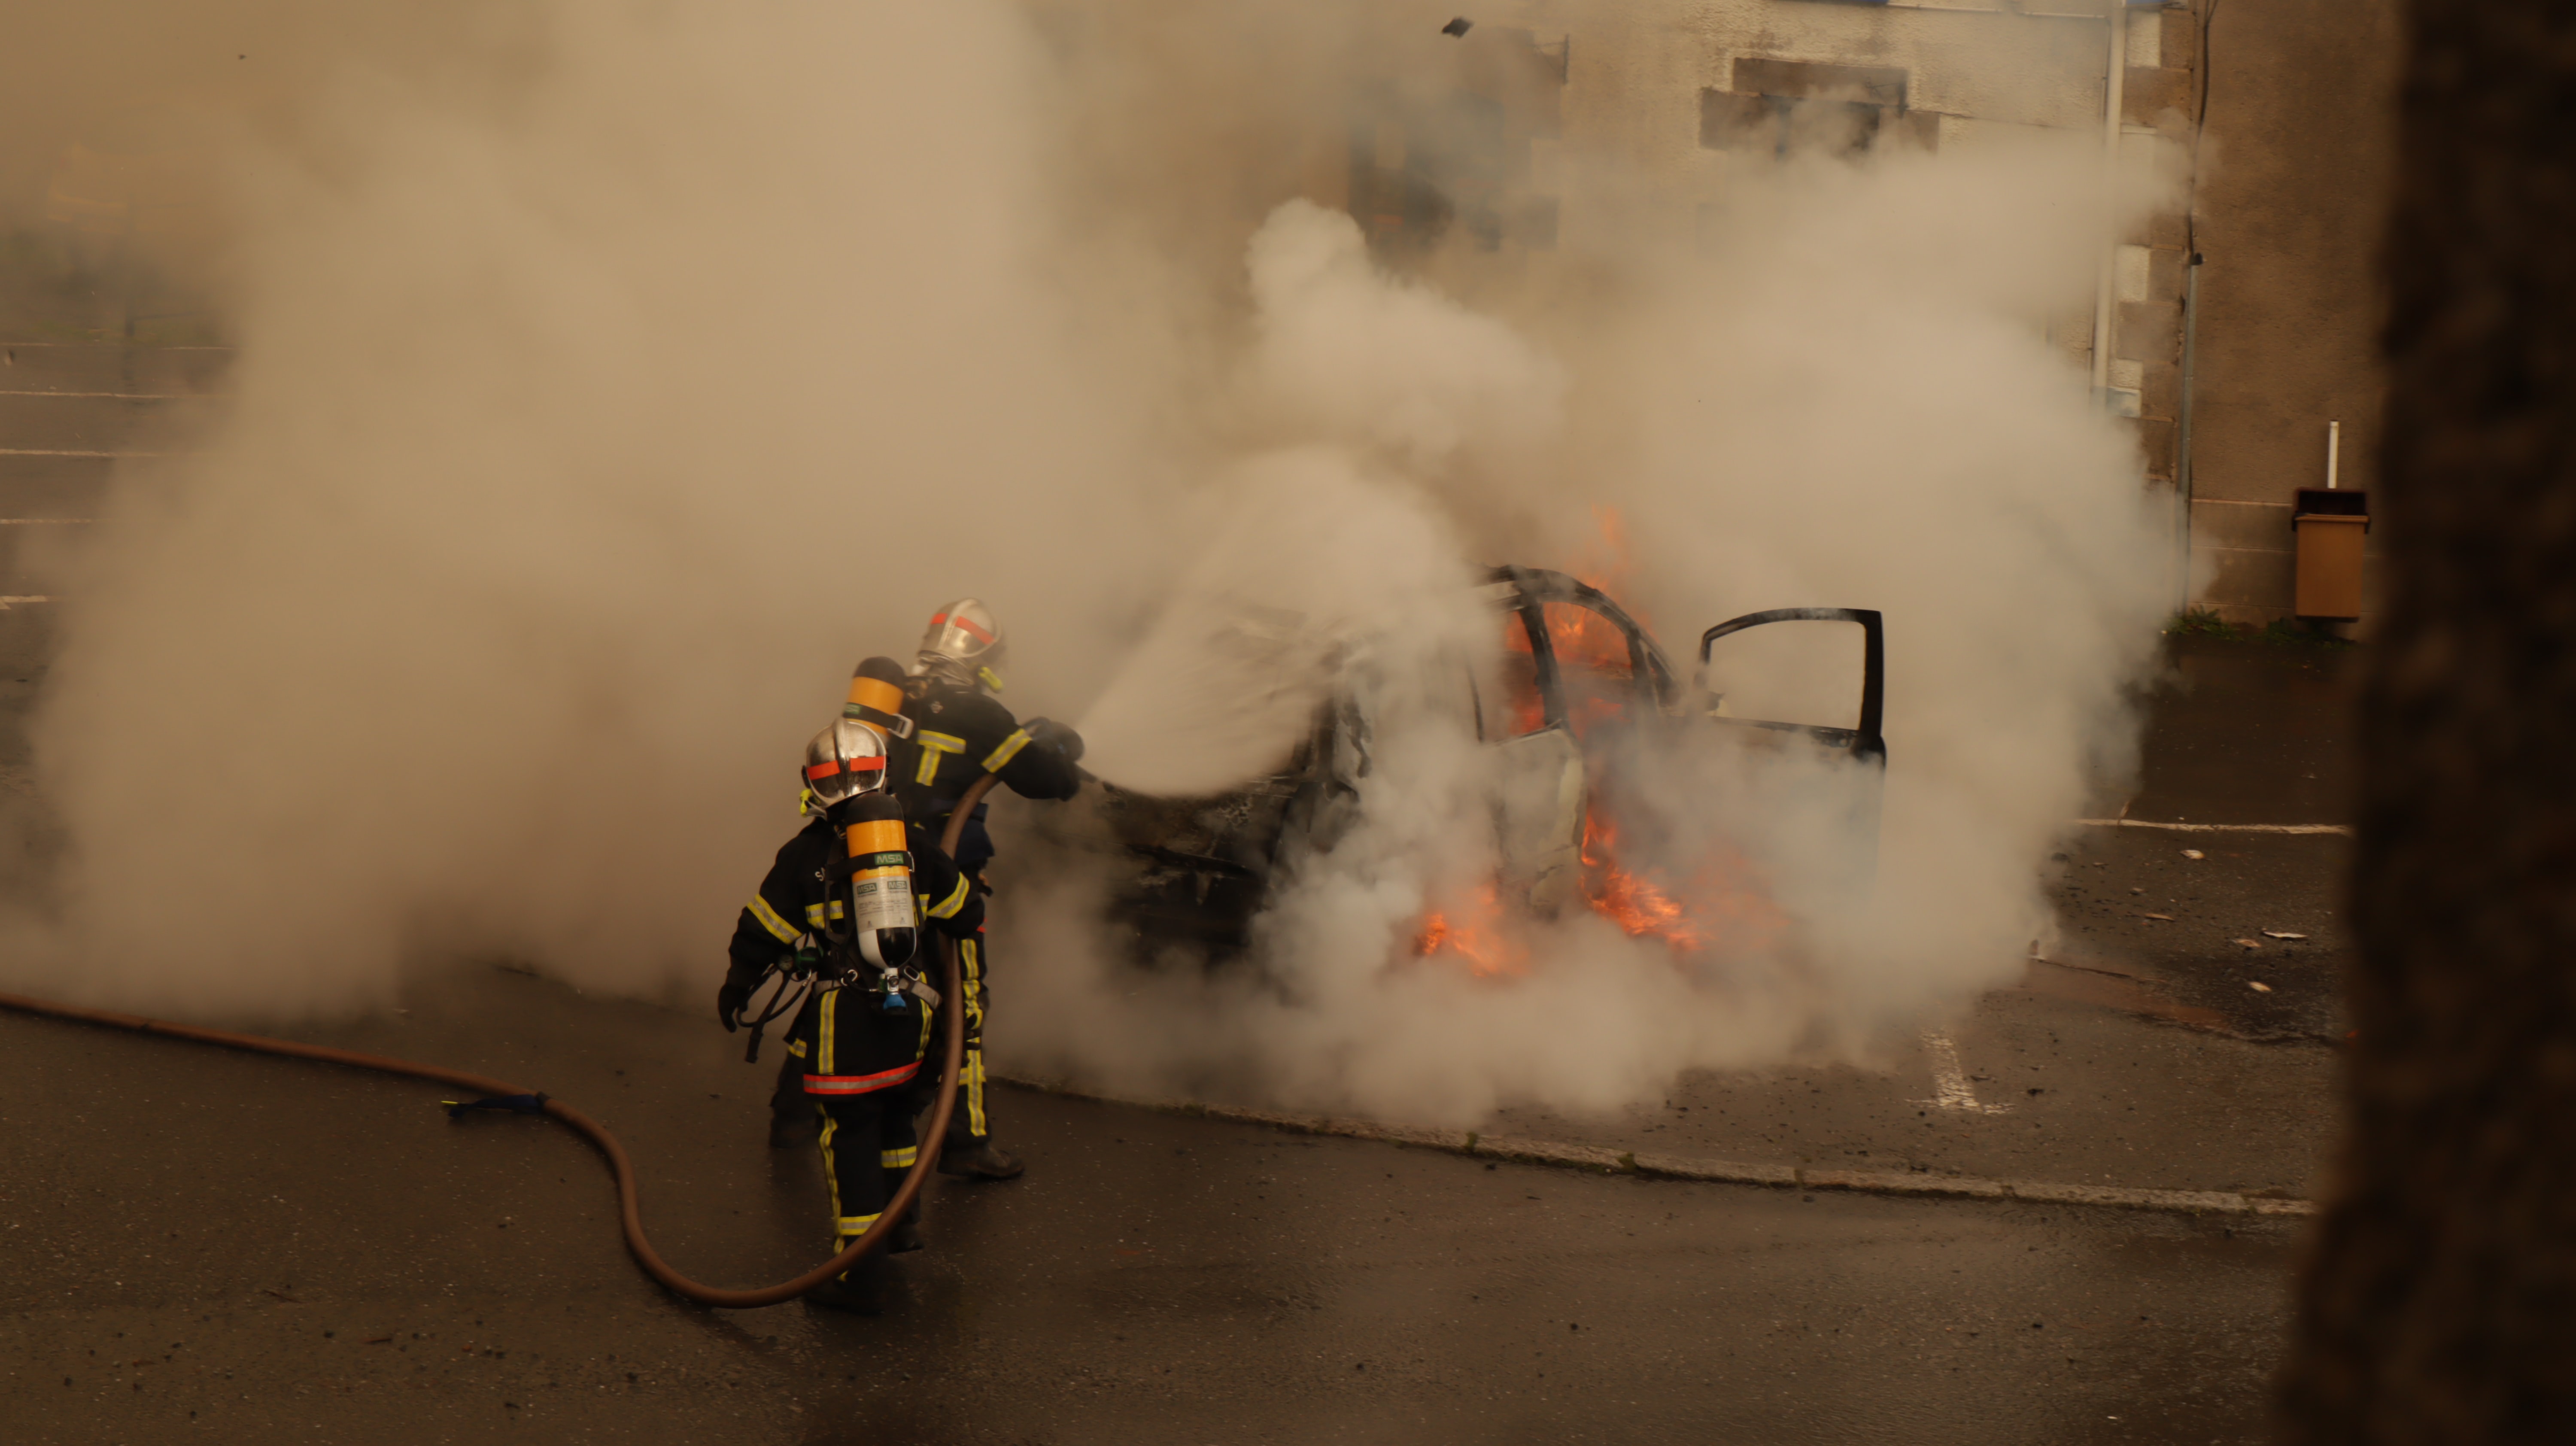 FIrefighters putting out vehicle fire; image by Gwendal Bar, via Unsplash.com.